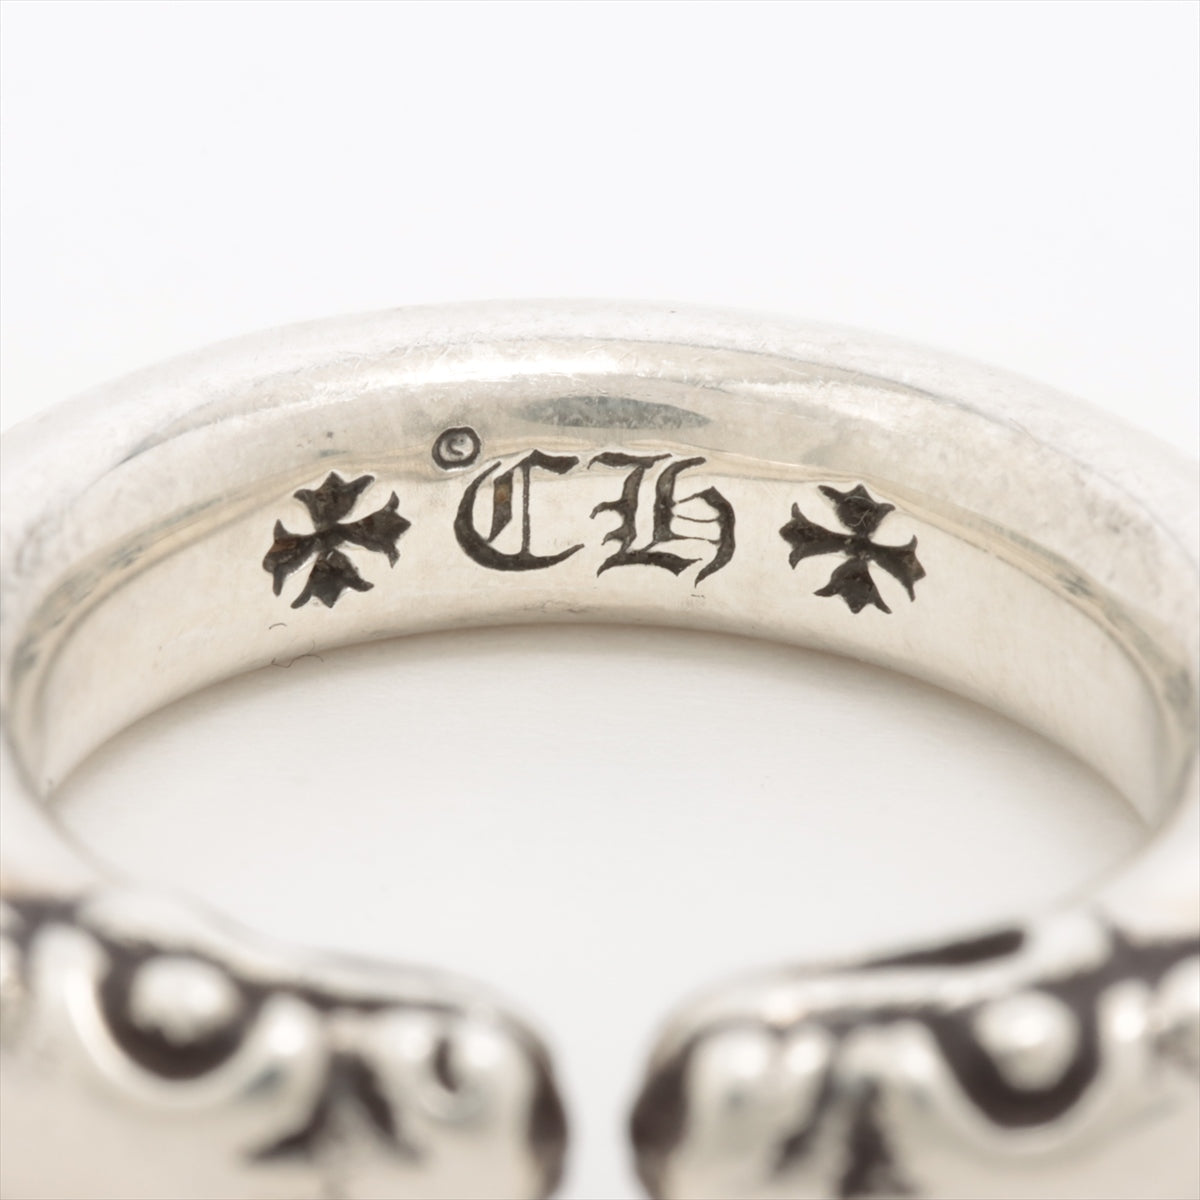 Chrome Hearts Double Dog rings 925 10.2g